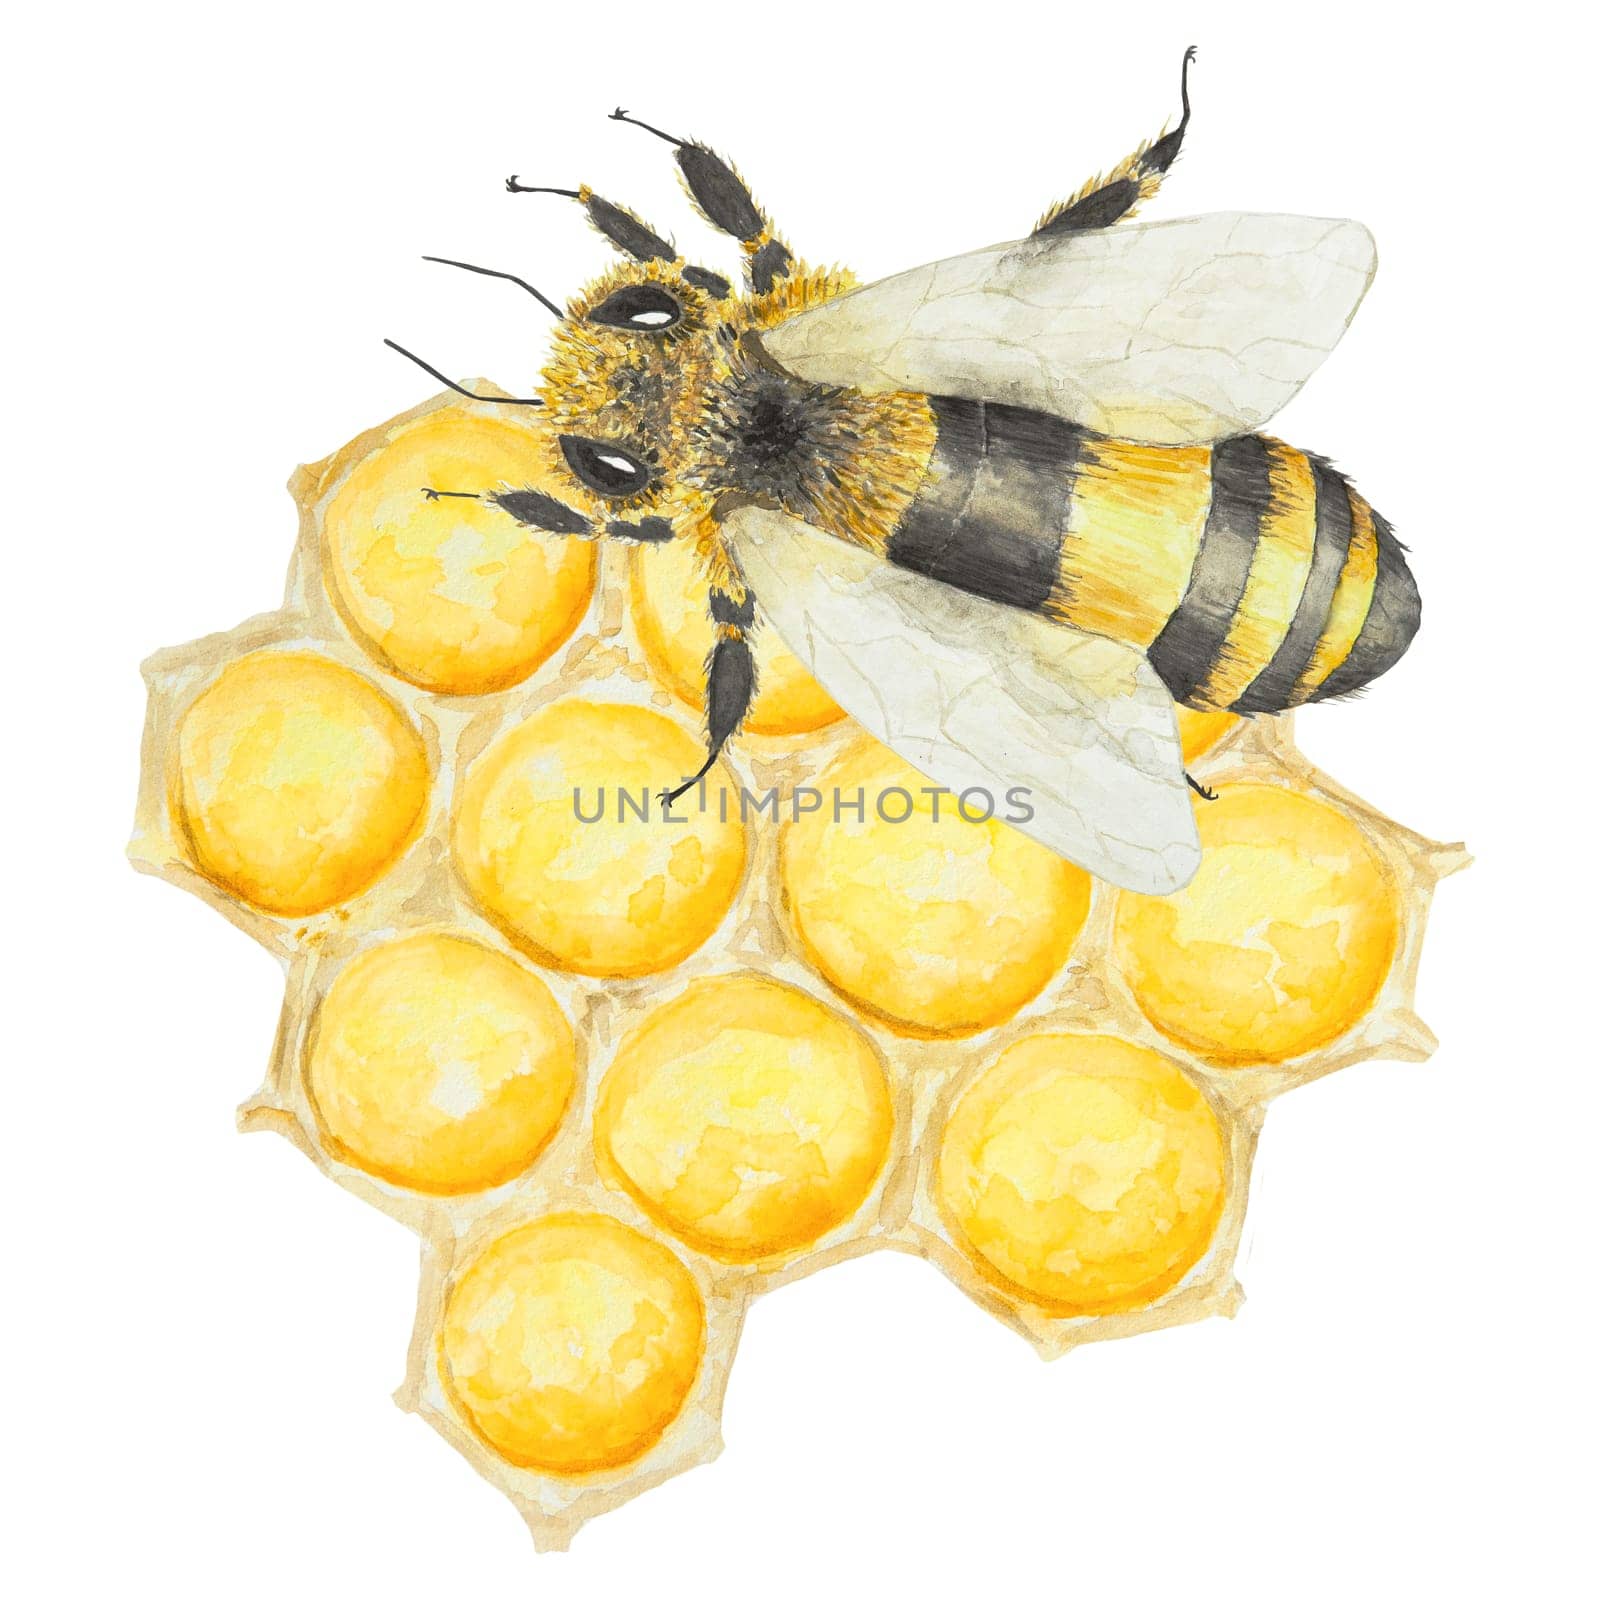 Watercolor illustration of bee and honey. Hand drawn and isolated on white background. Great for printing on fabric, postcards, invitations, menus, cosmetics, cooking books and more.